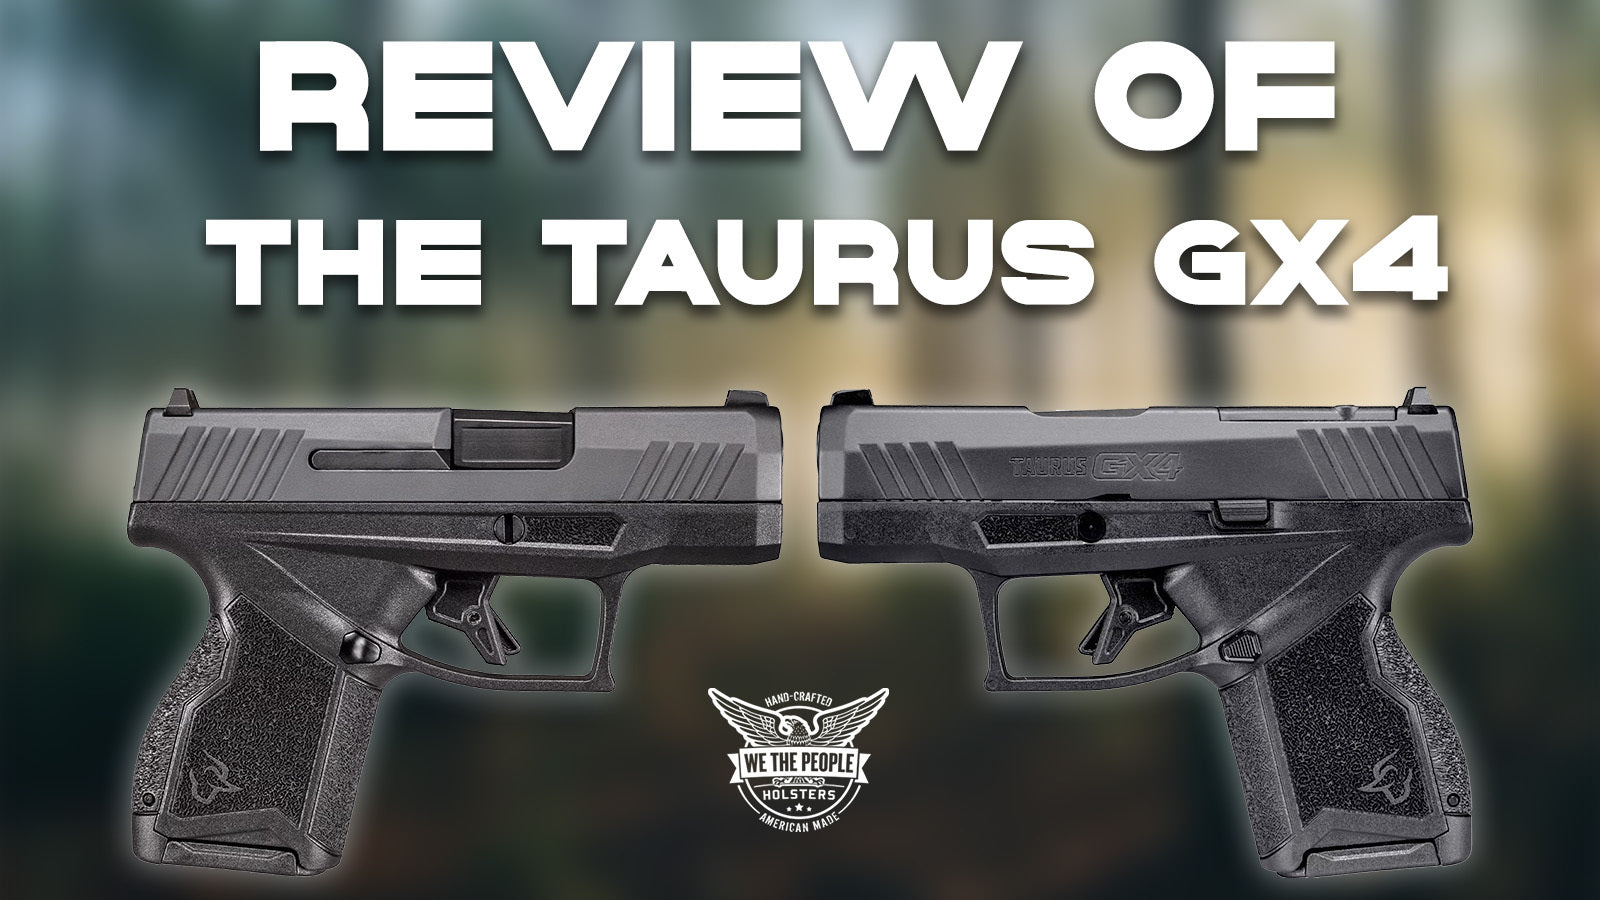 Review of the Taurus GX4